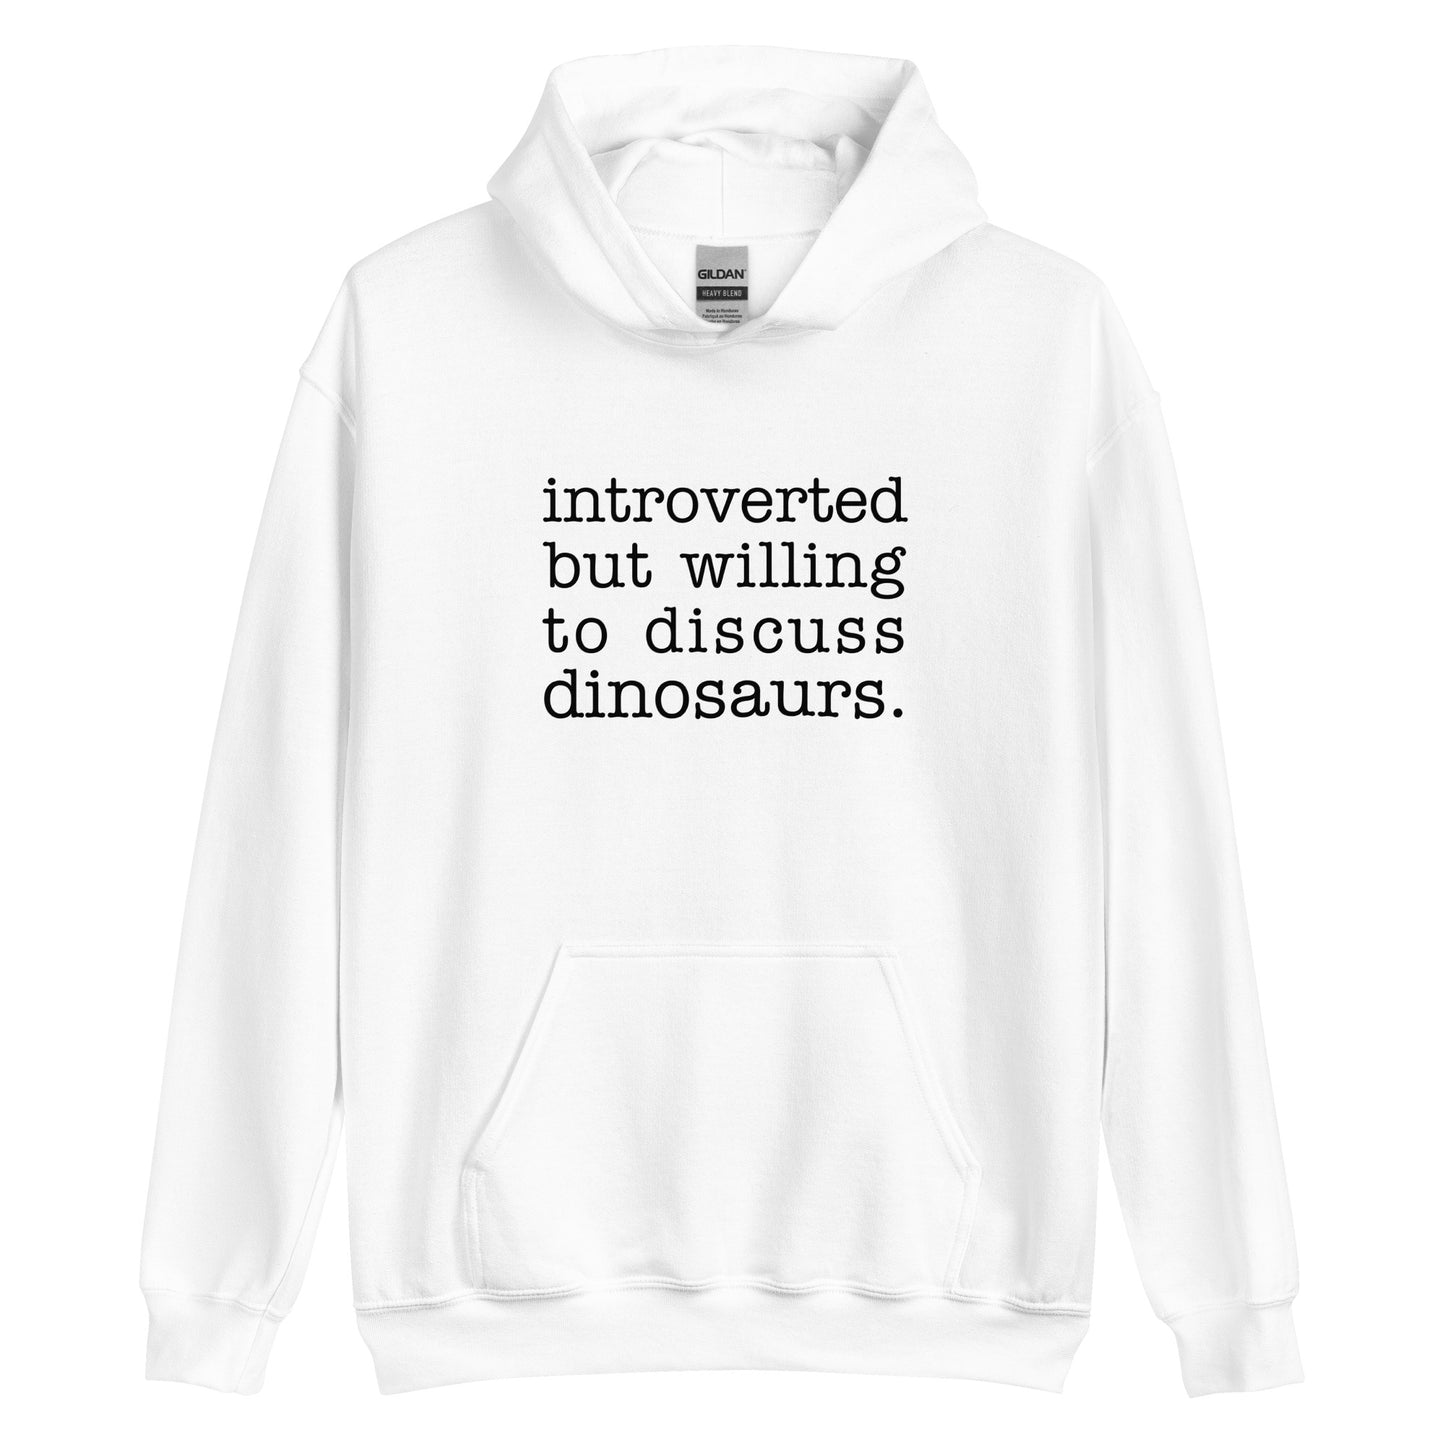 A white hooded sweatshirt with black text reading "introverted but willing to discuss dinosaurs"